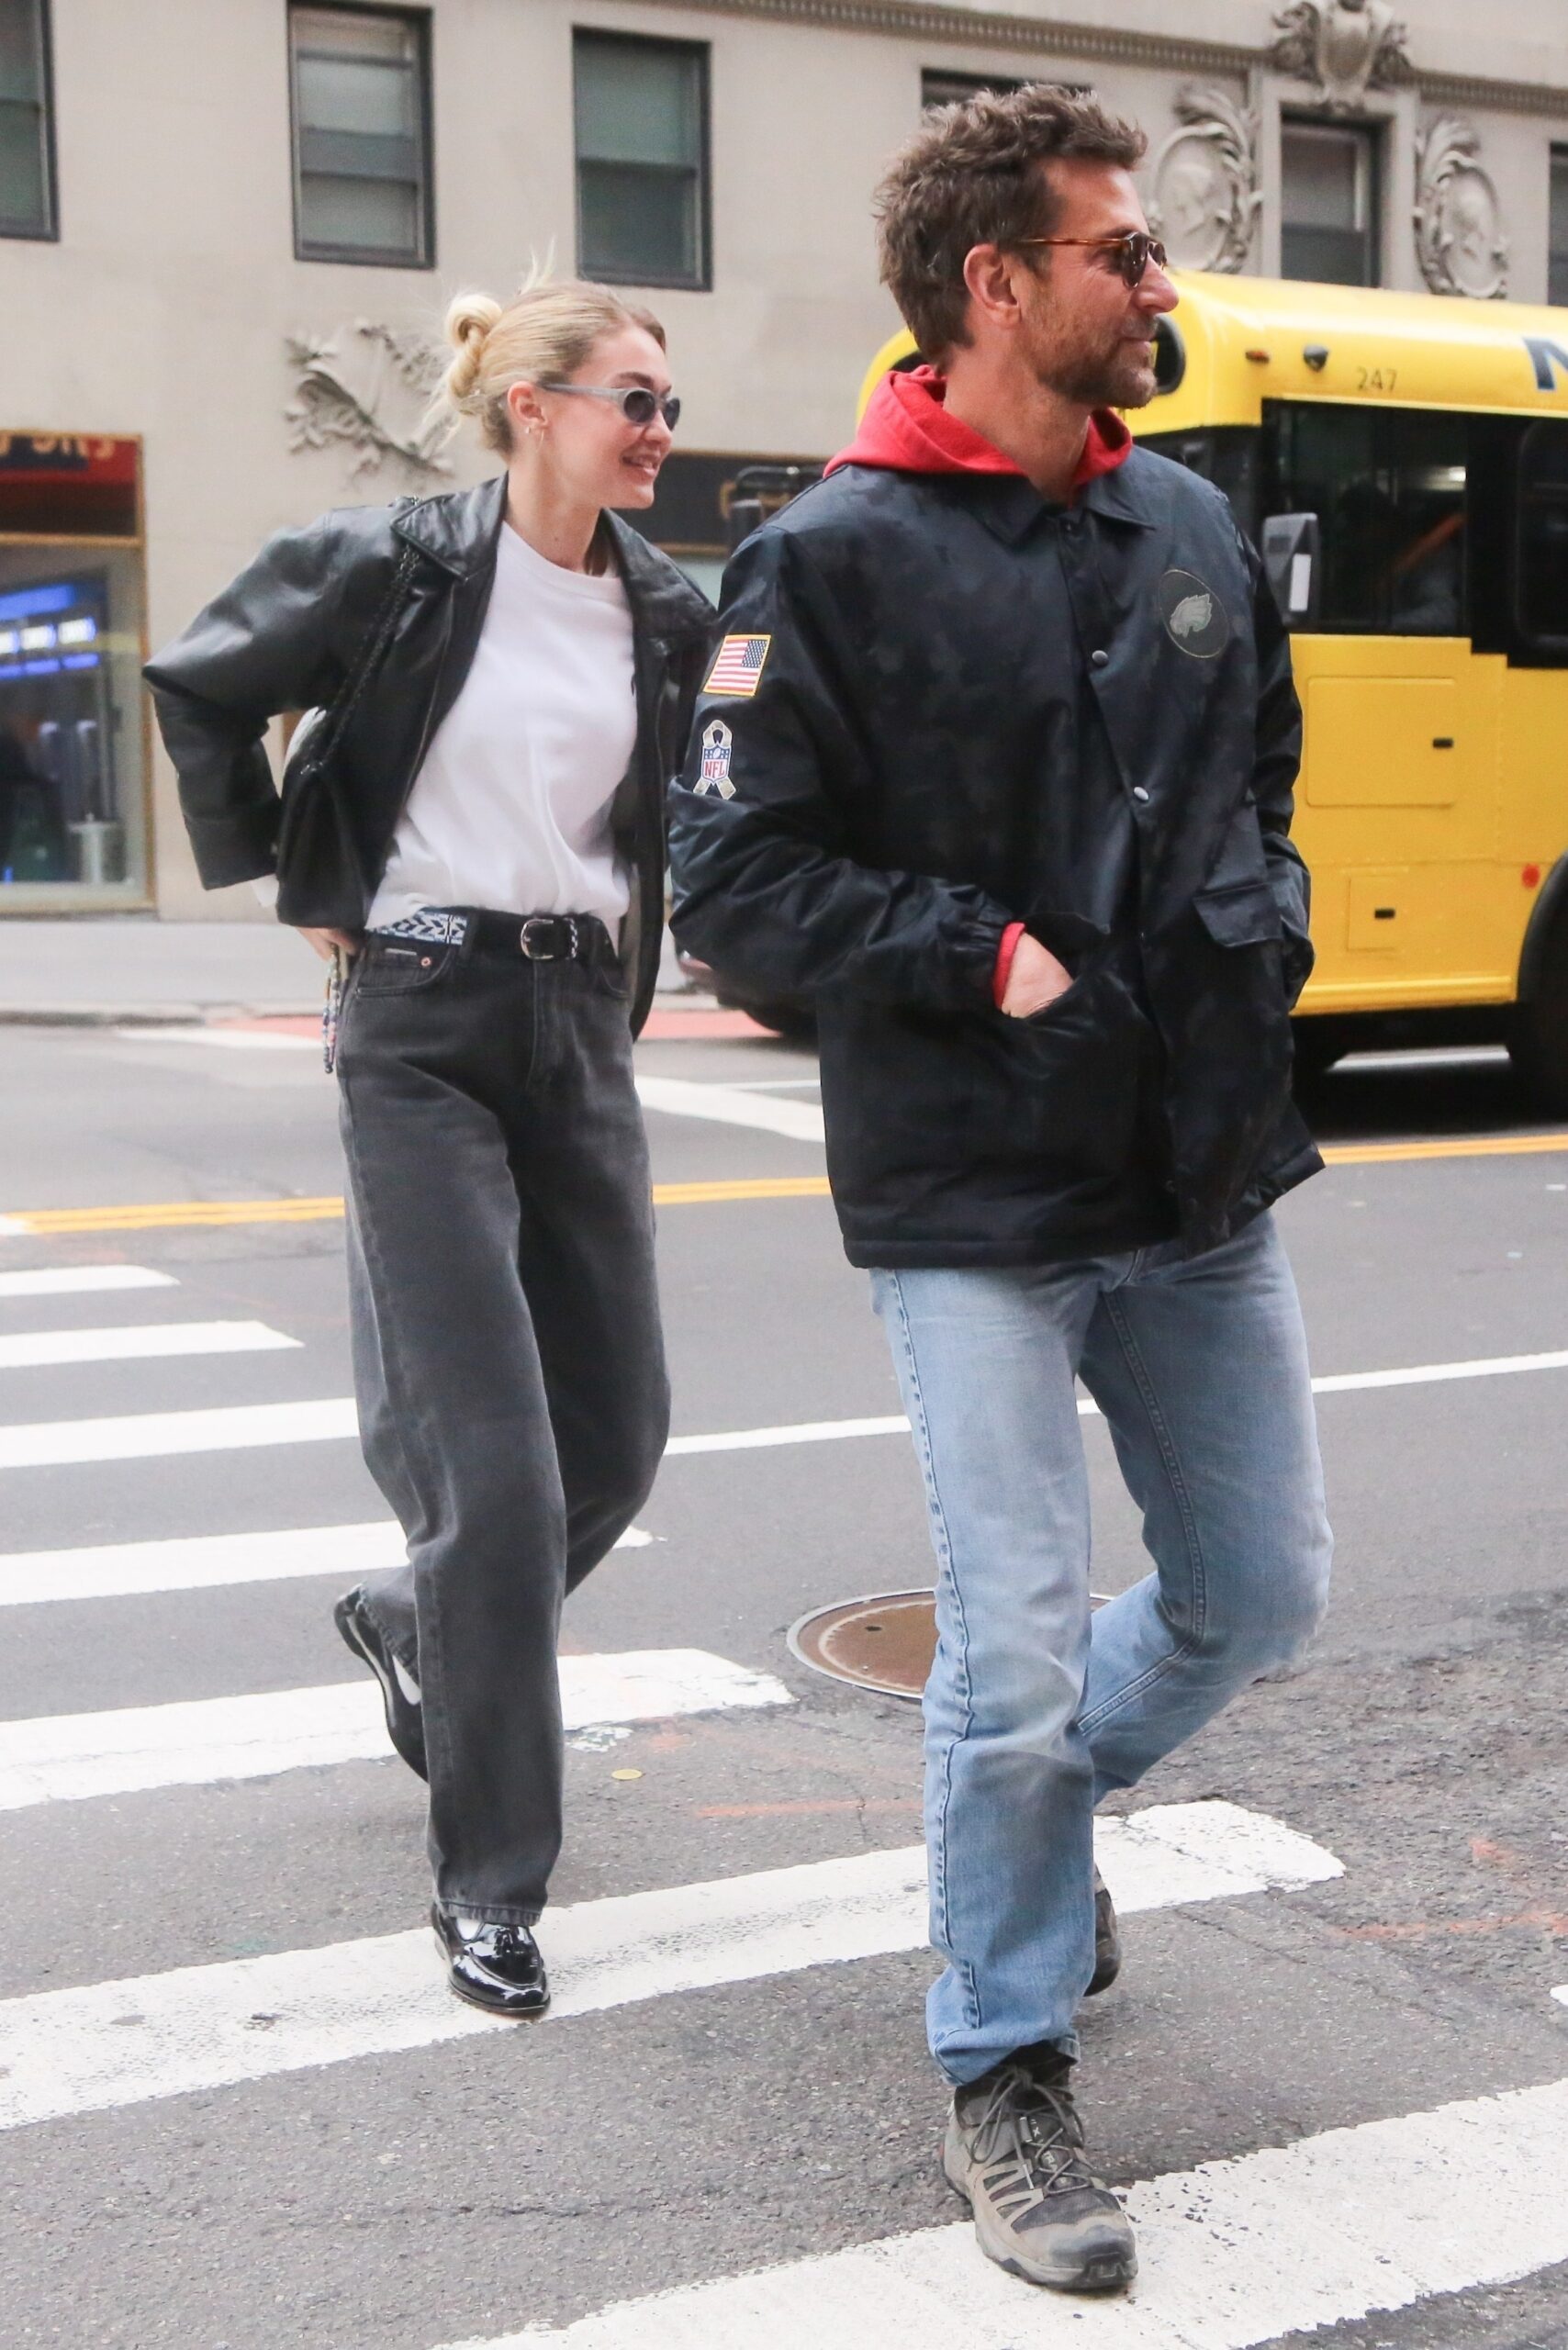 Gigi Hadid and Bradley Cooper flash huge smiles while strolling through NYC together